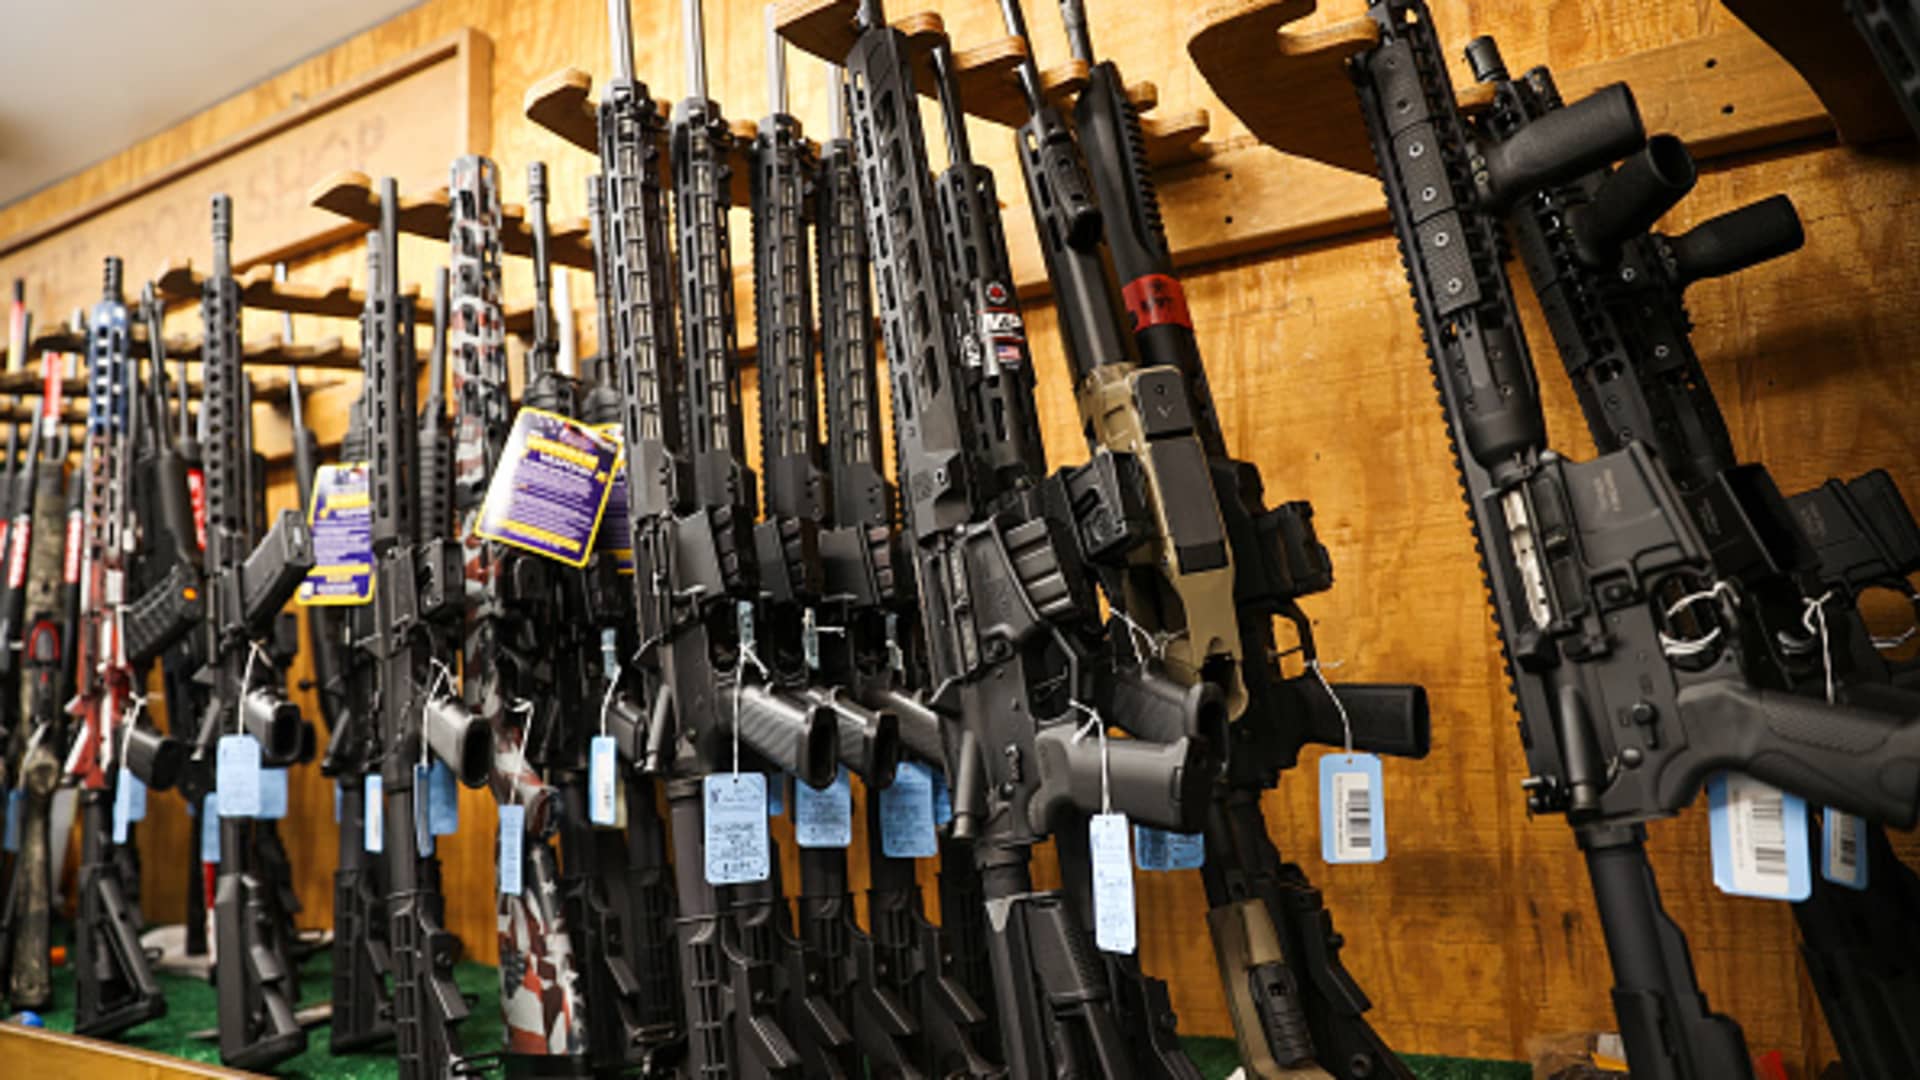 GOP attorneys general call on credit card companies to drop plans for gun store ..